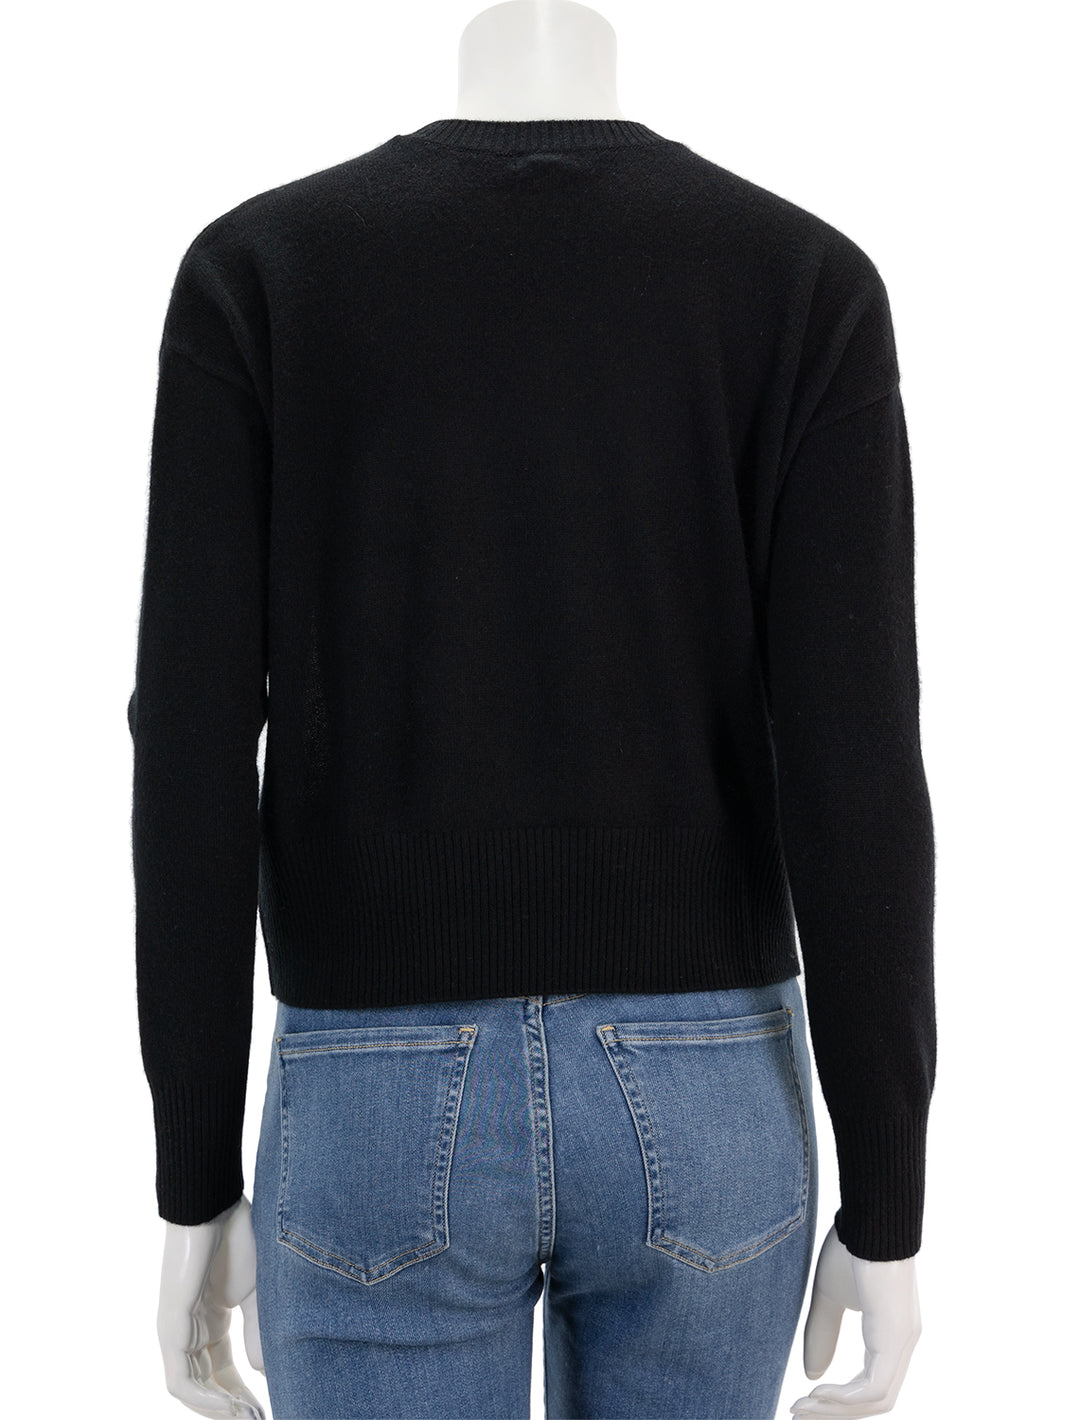 Back view of Minnie Rose's cashmere ski out west sweater.